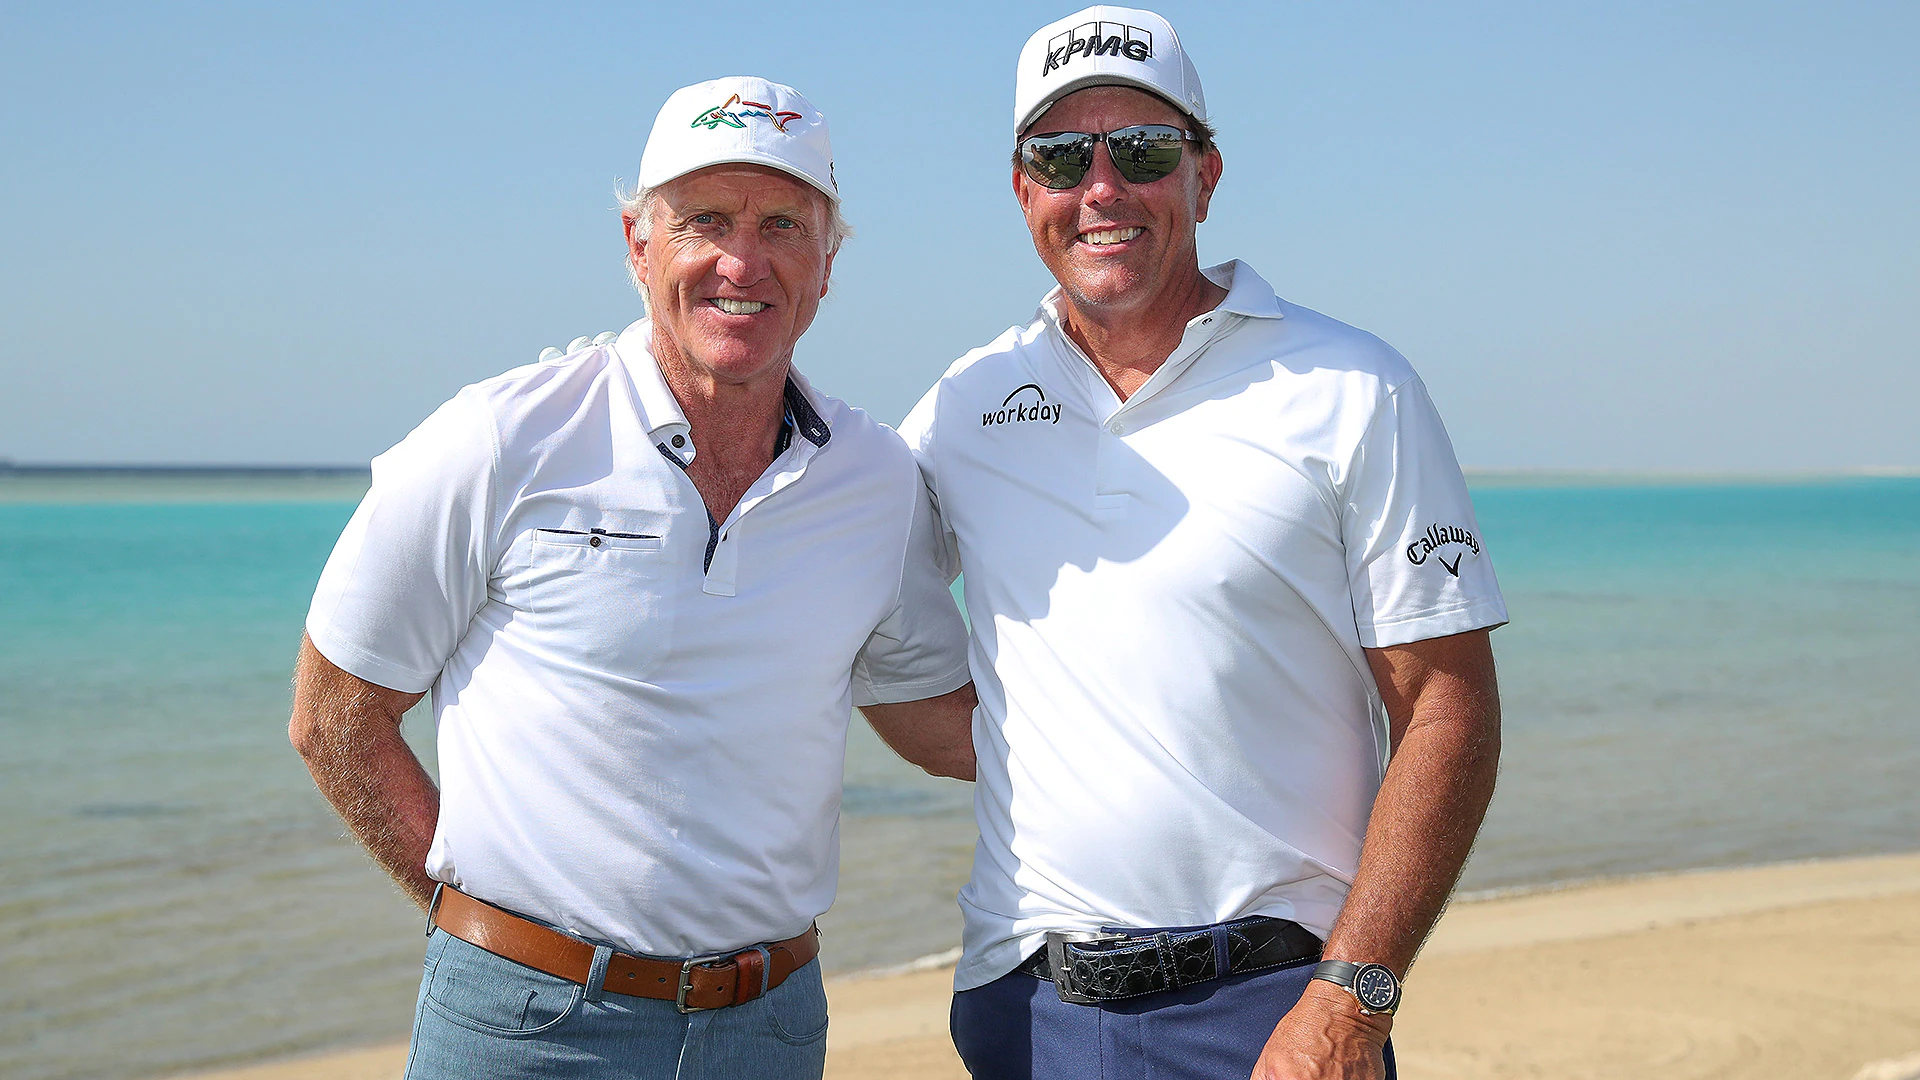 Timeline: Key events involving LIV Golf Invitational Series and Phil Mickelson